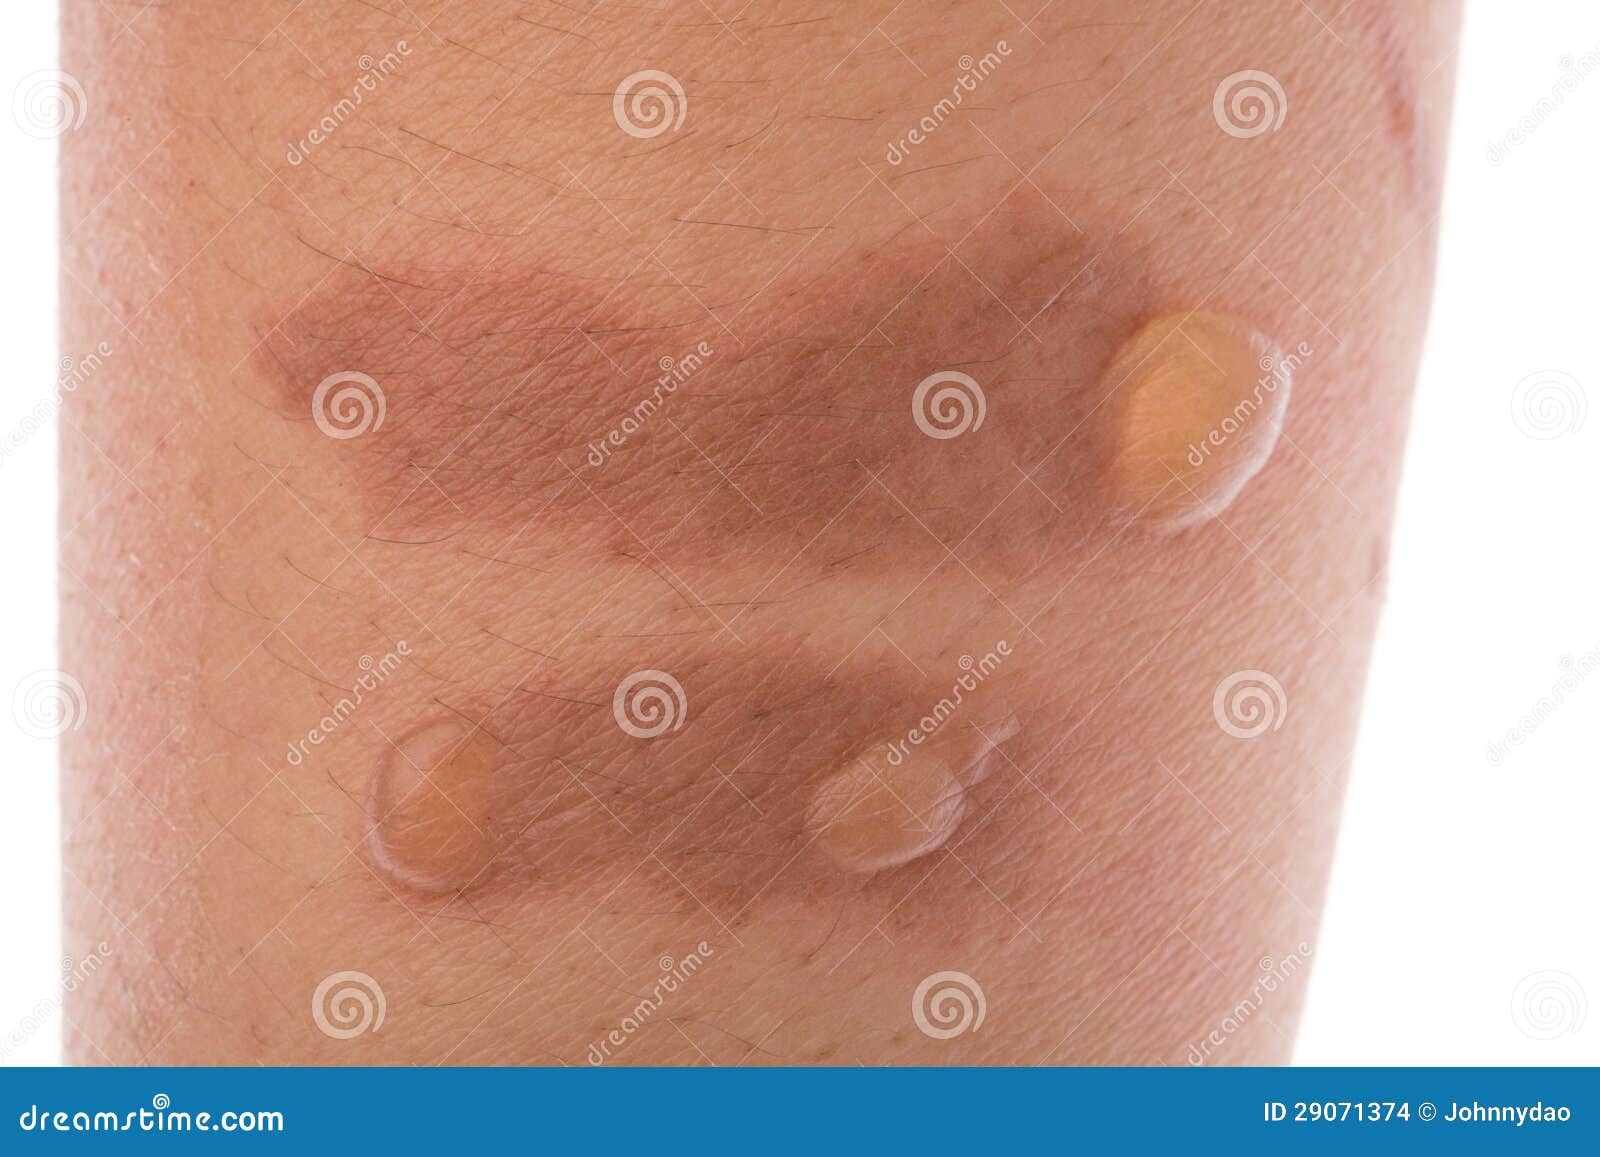 Burn Blisters On The Skin Stock Images - Image: 29071374